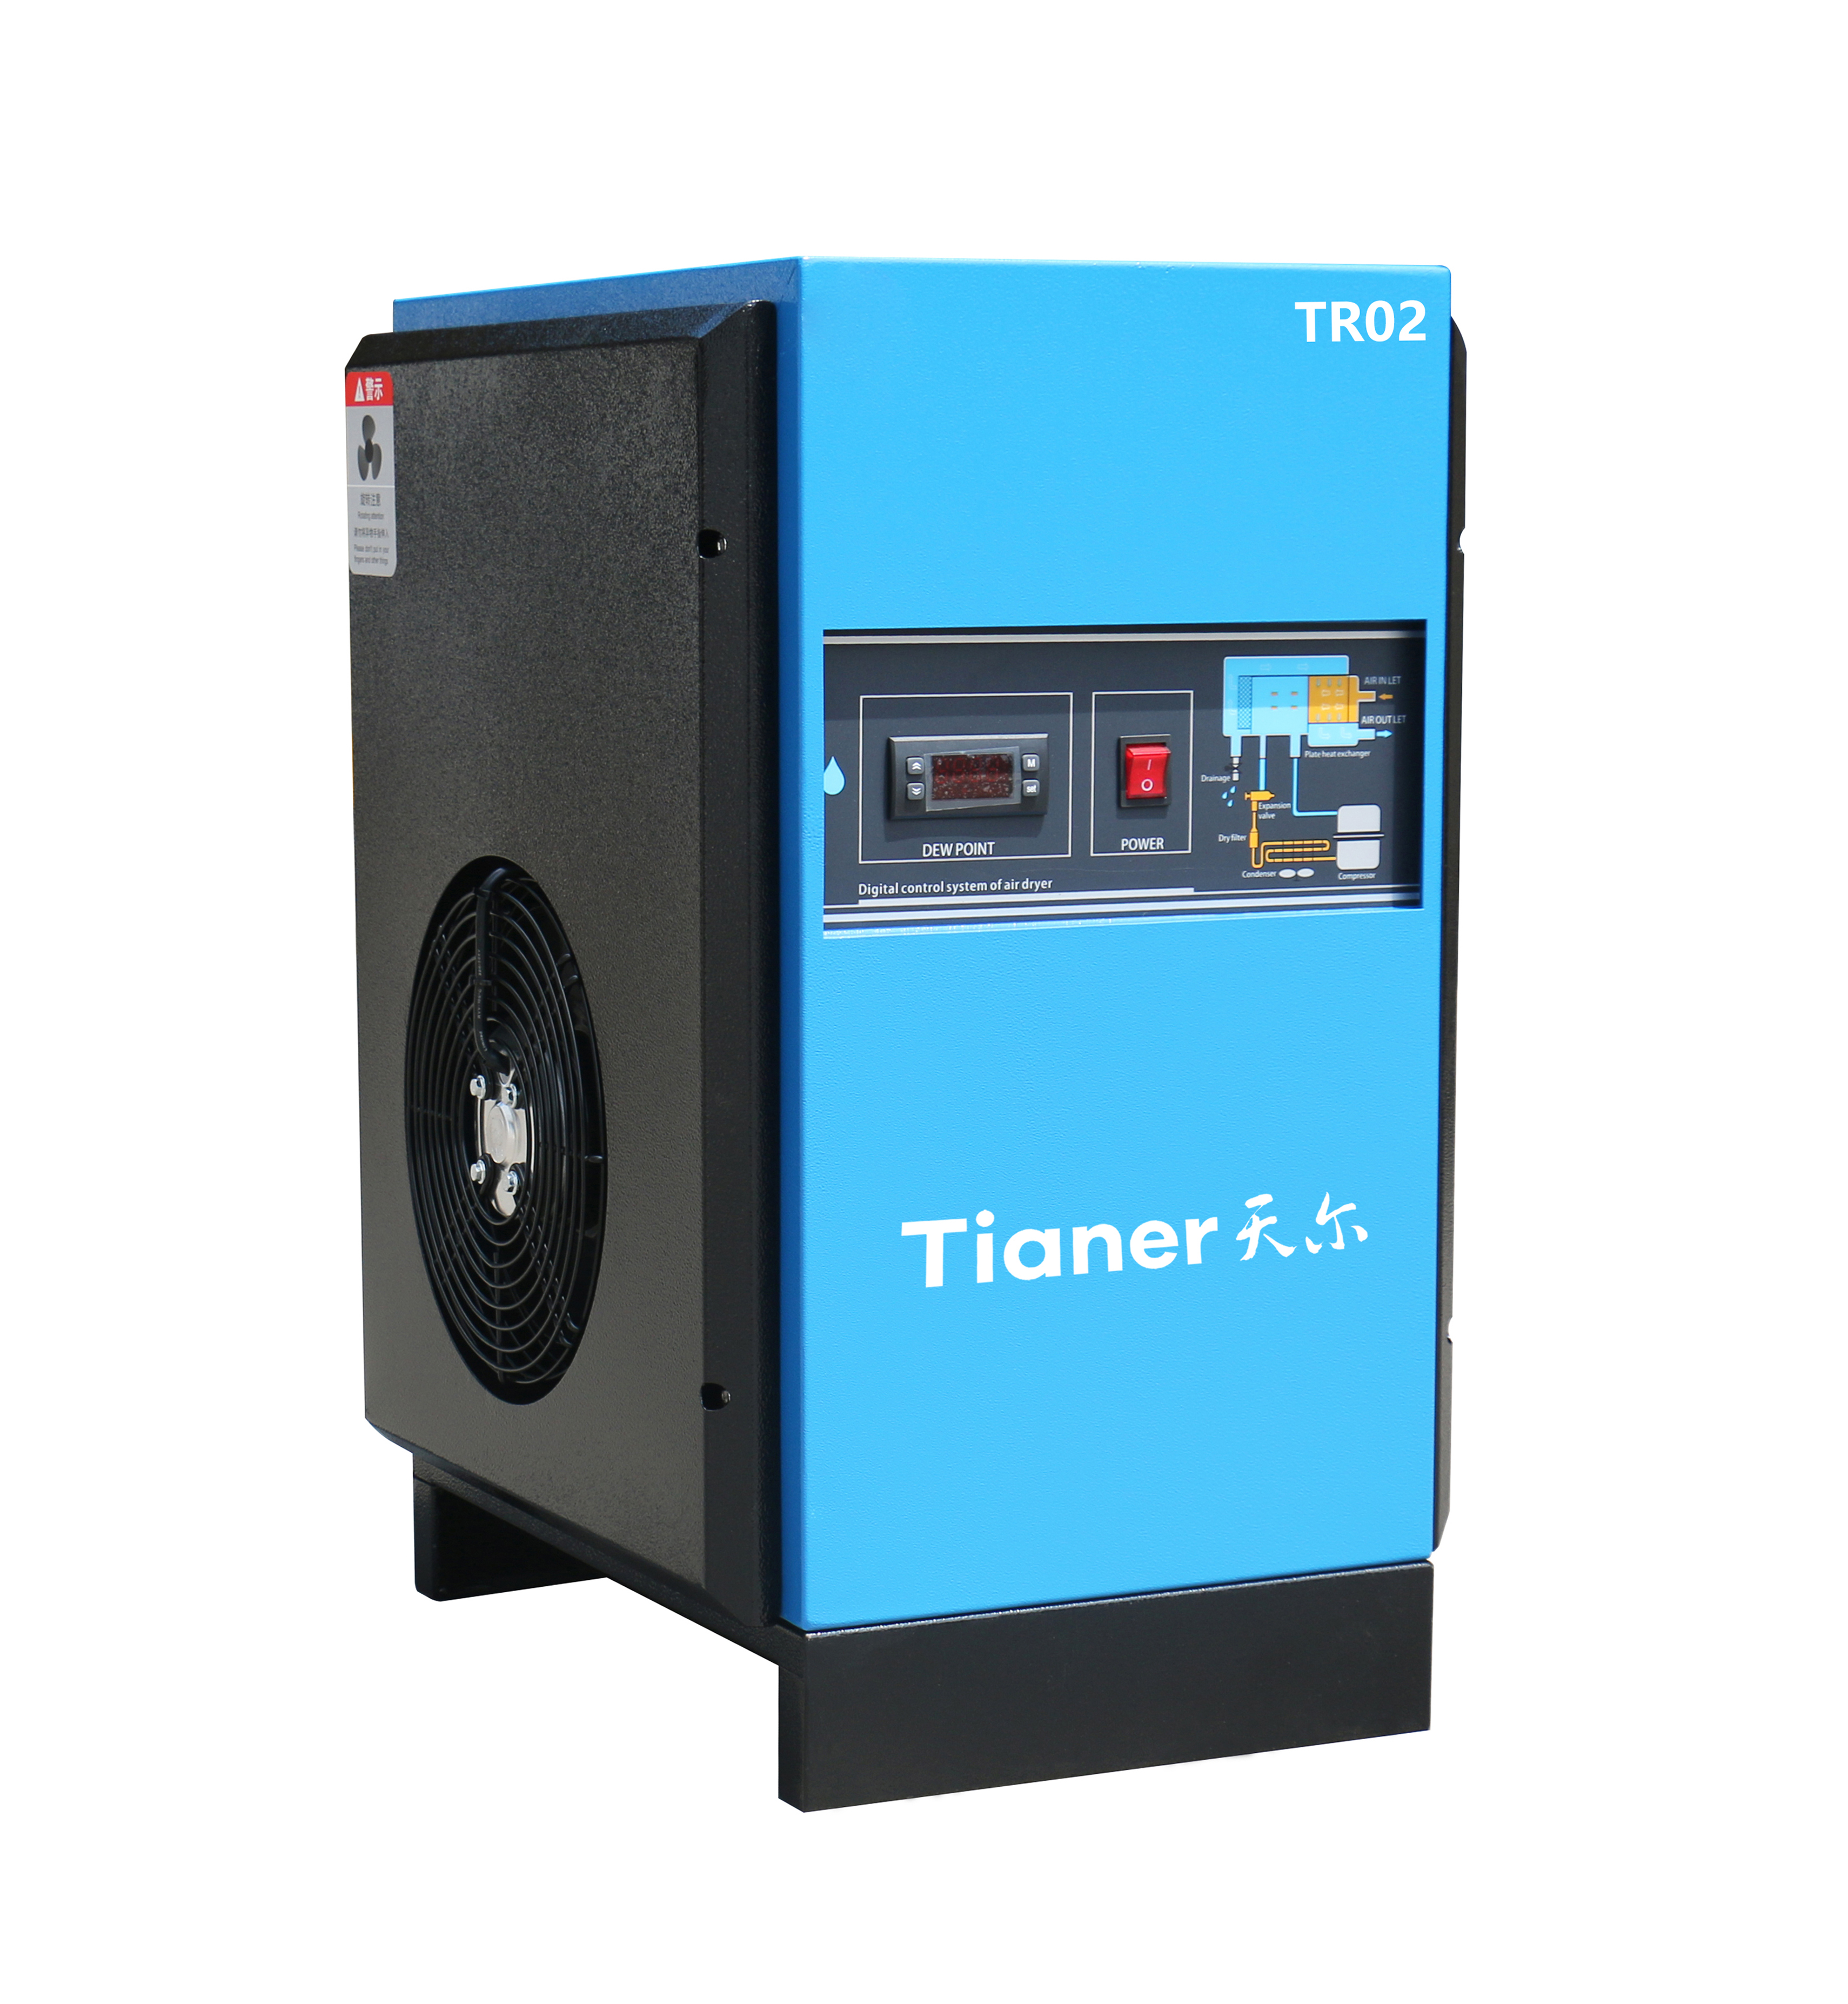 https://www.yctairdryer.com/compressed-dryer-machine-tr-01-for-air-compressor-1-2-m3min-product/